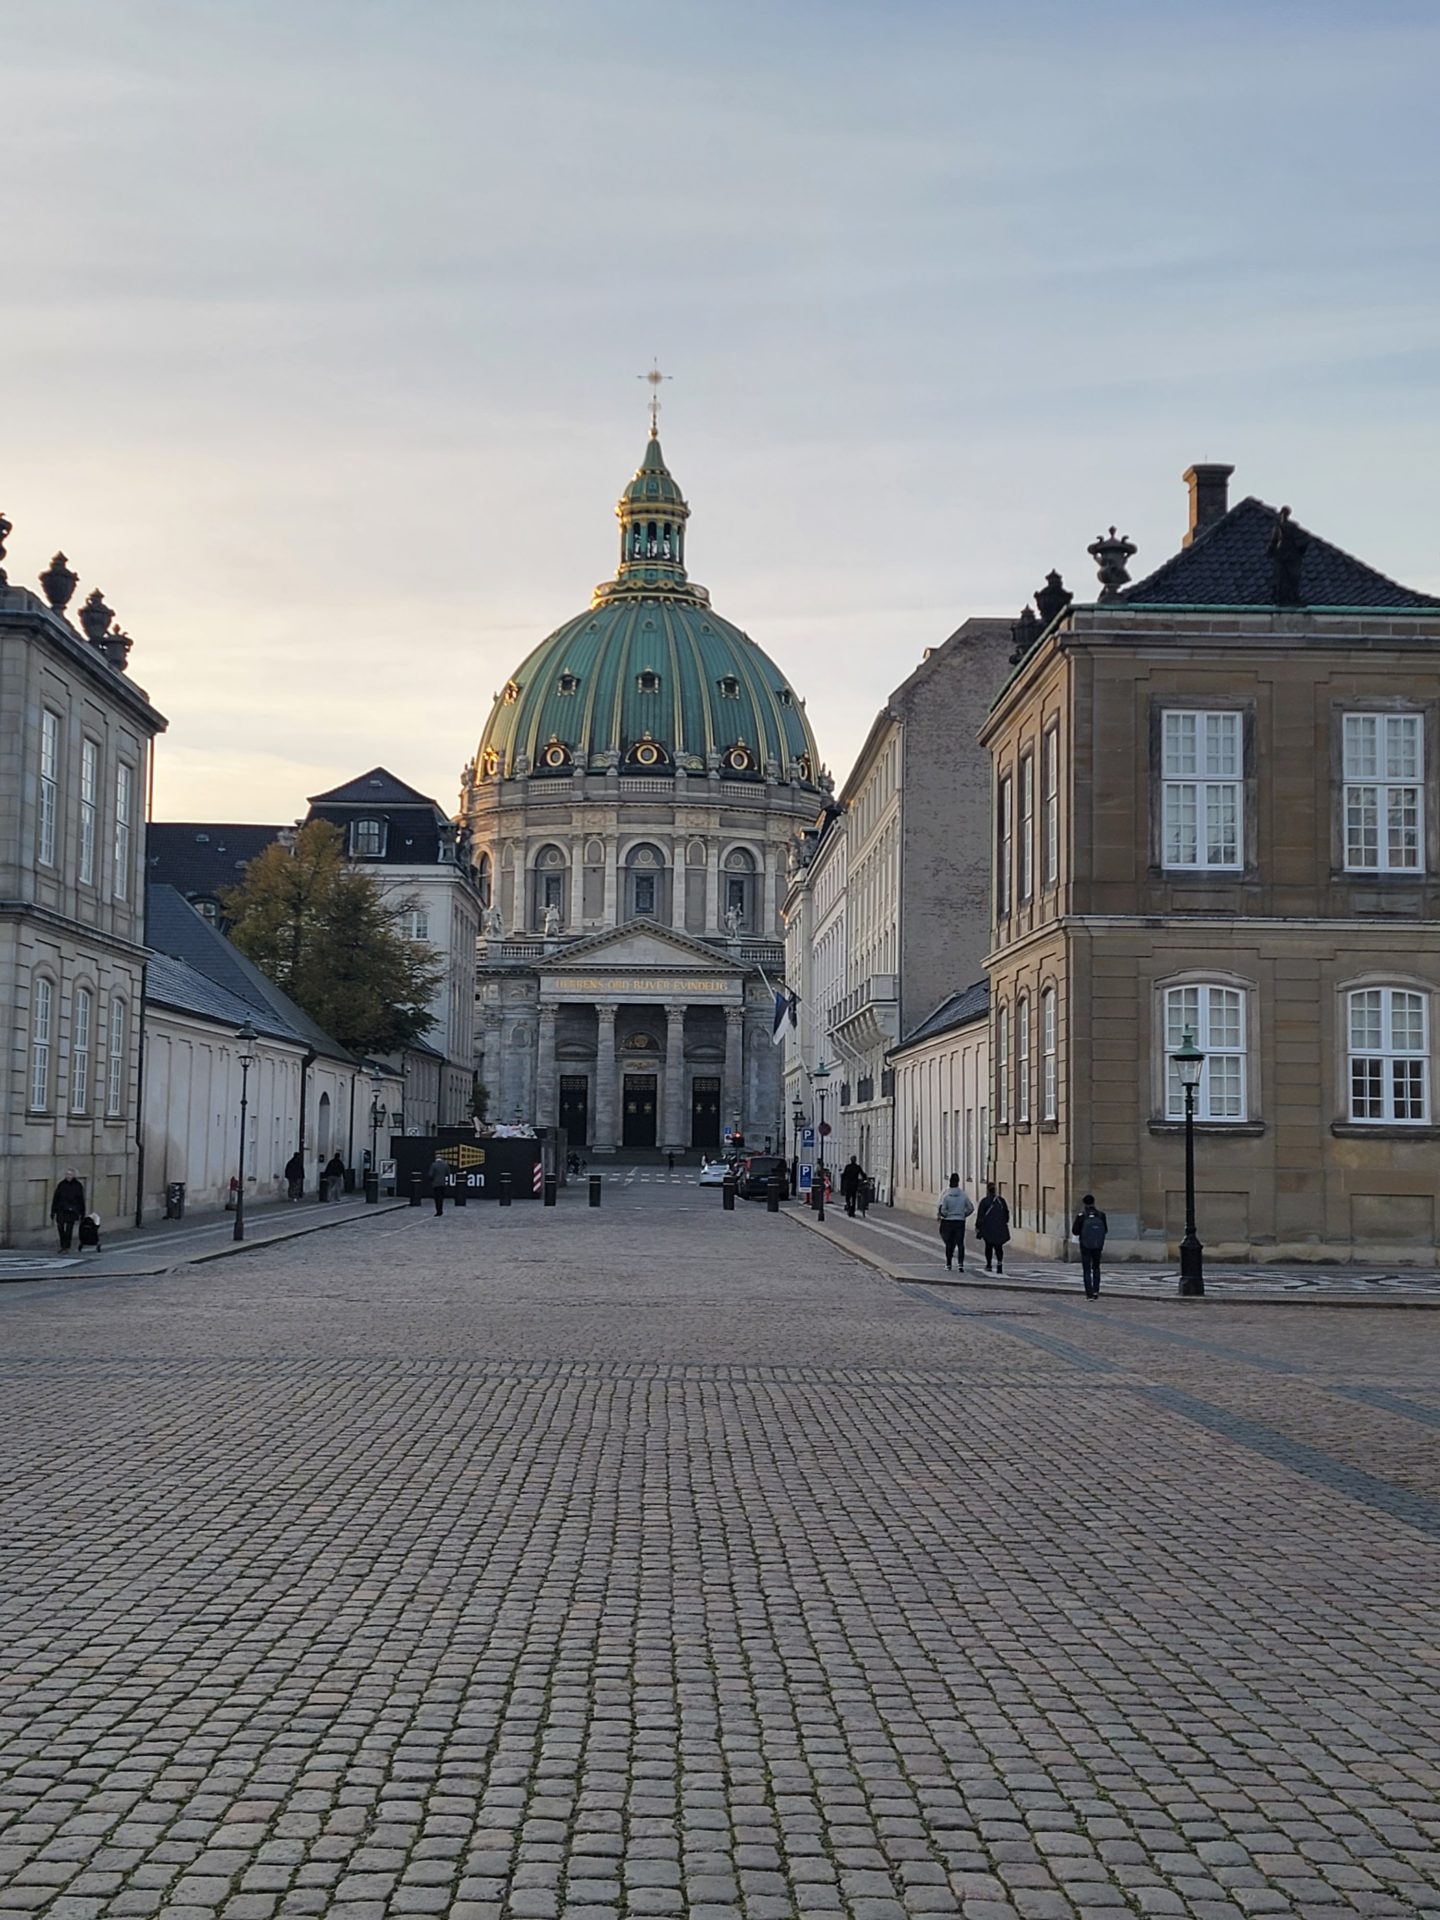 a stone street with Amalienborg and people walking around